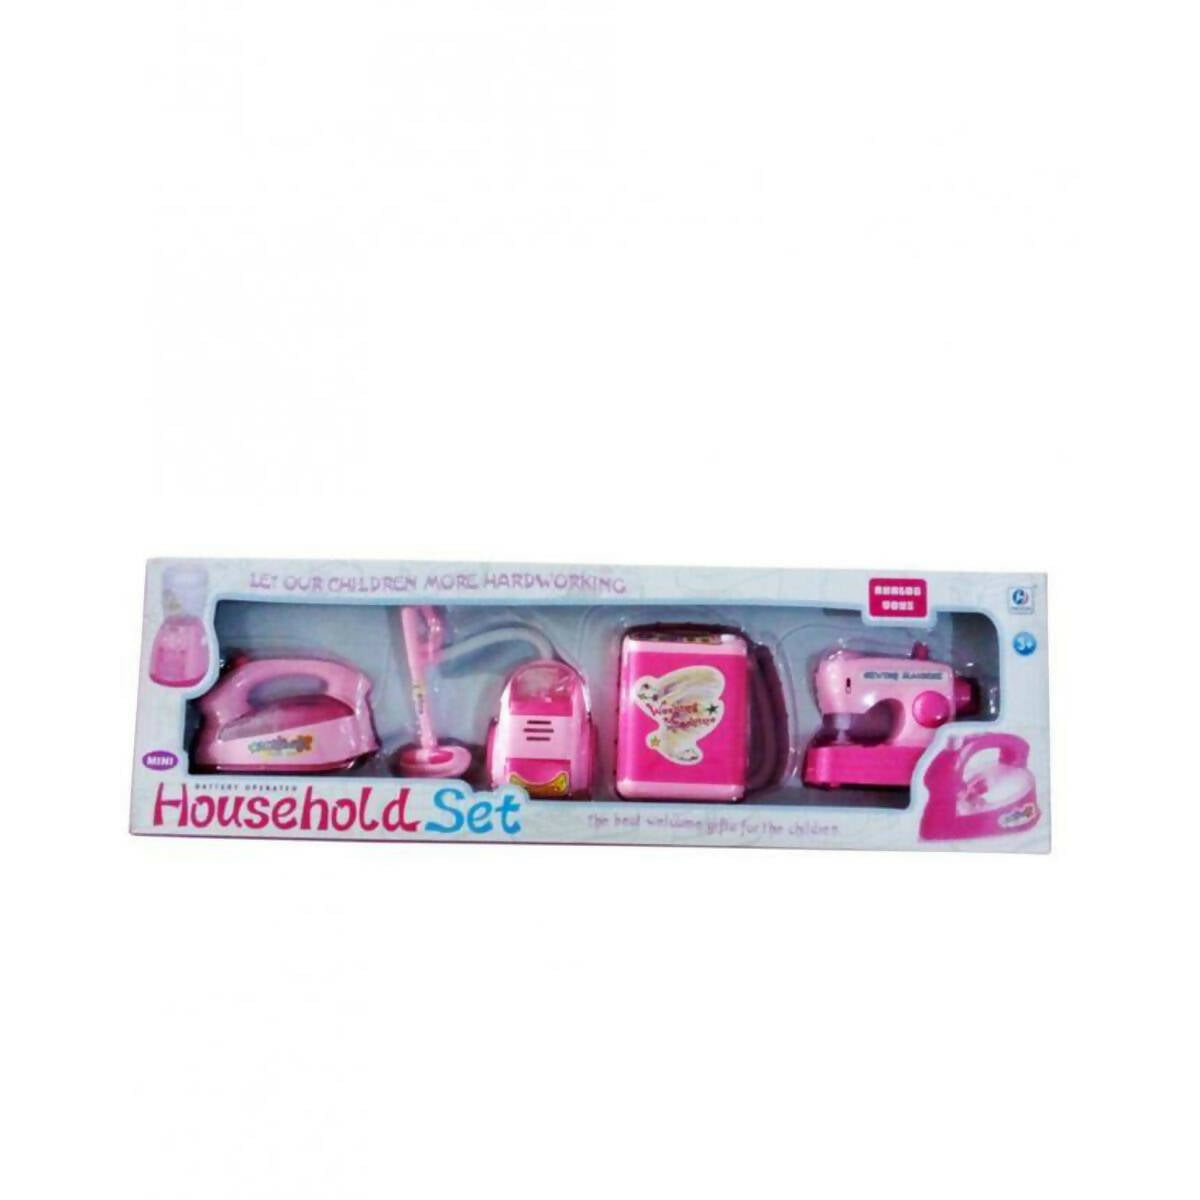 Household Cleaning Play Set - Pink